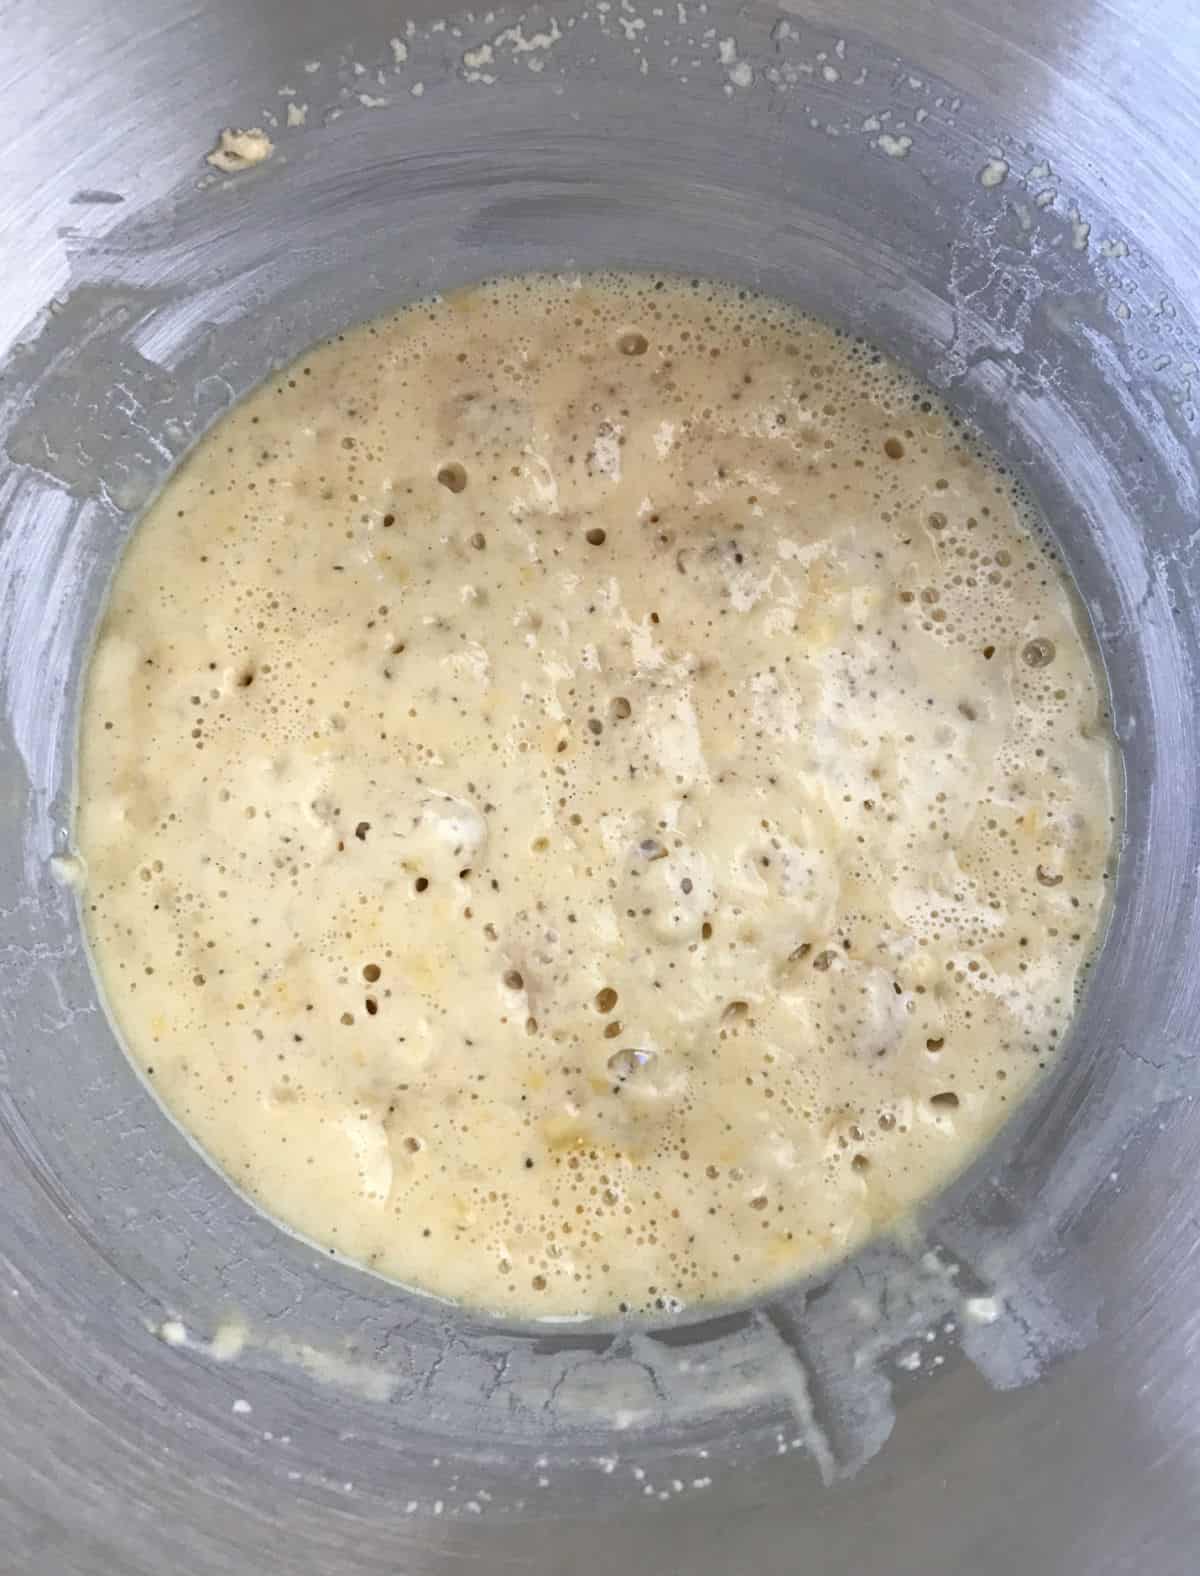 Bubbly yeast mixture in a metal bowl